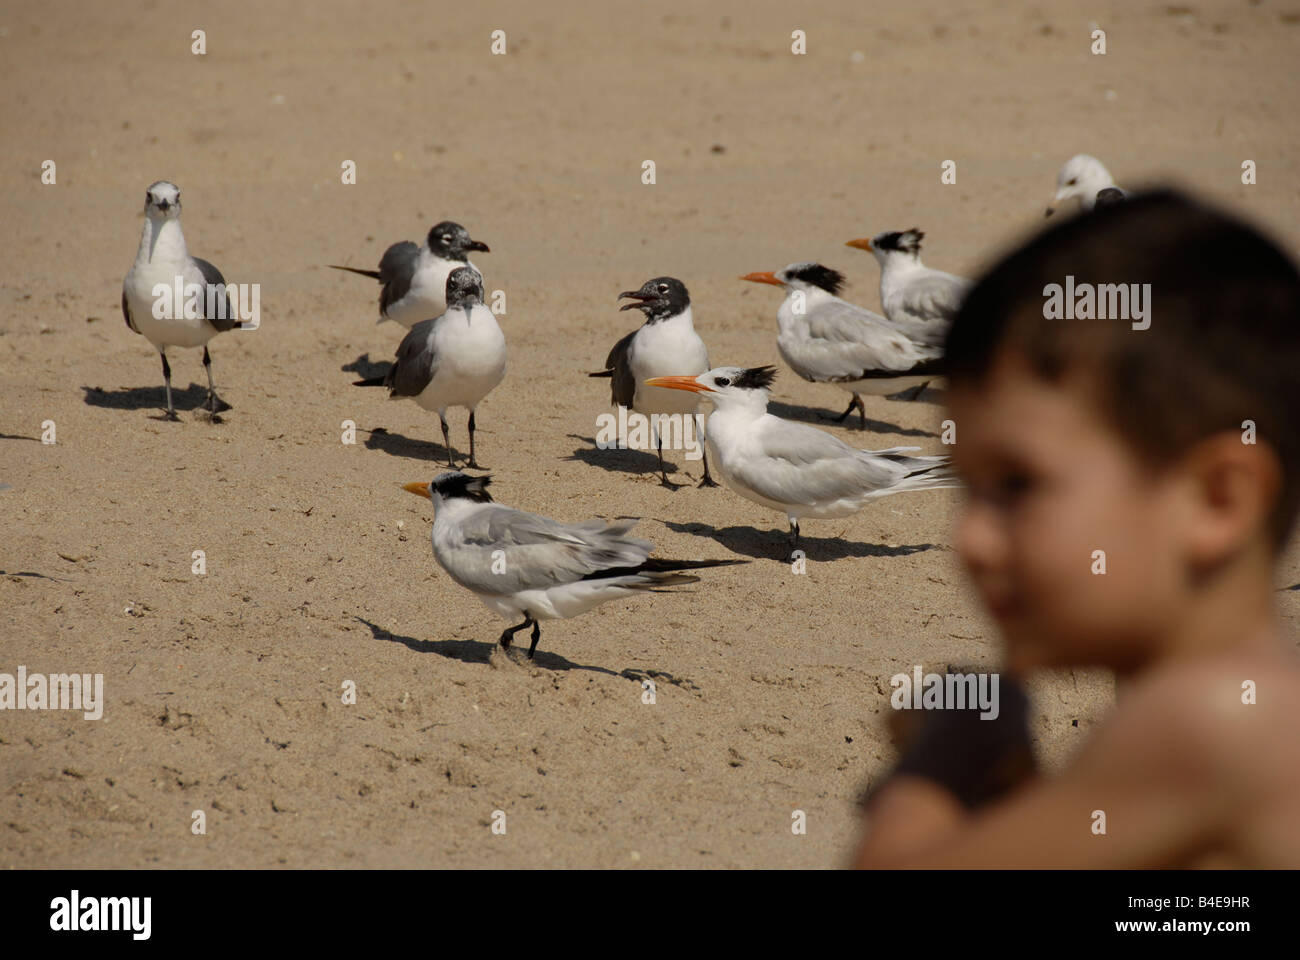 Group of Caspian Terns on the sandy beach with boy in the foreground, Pompano-Beach Florida USA. Stock Photo